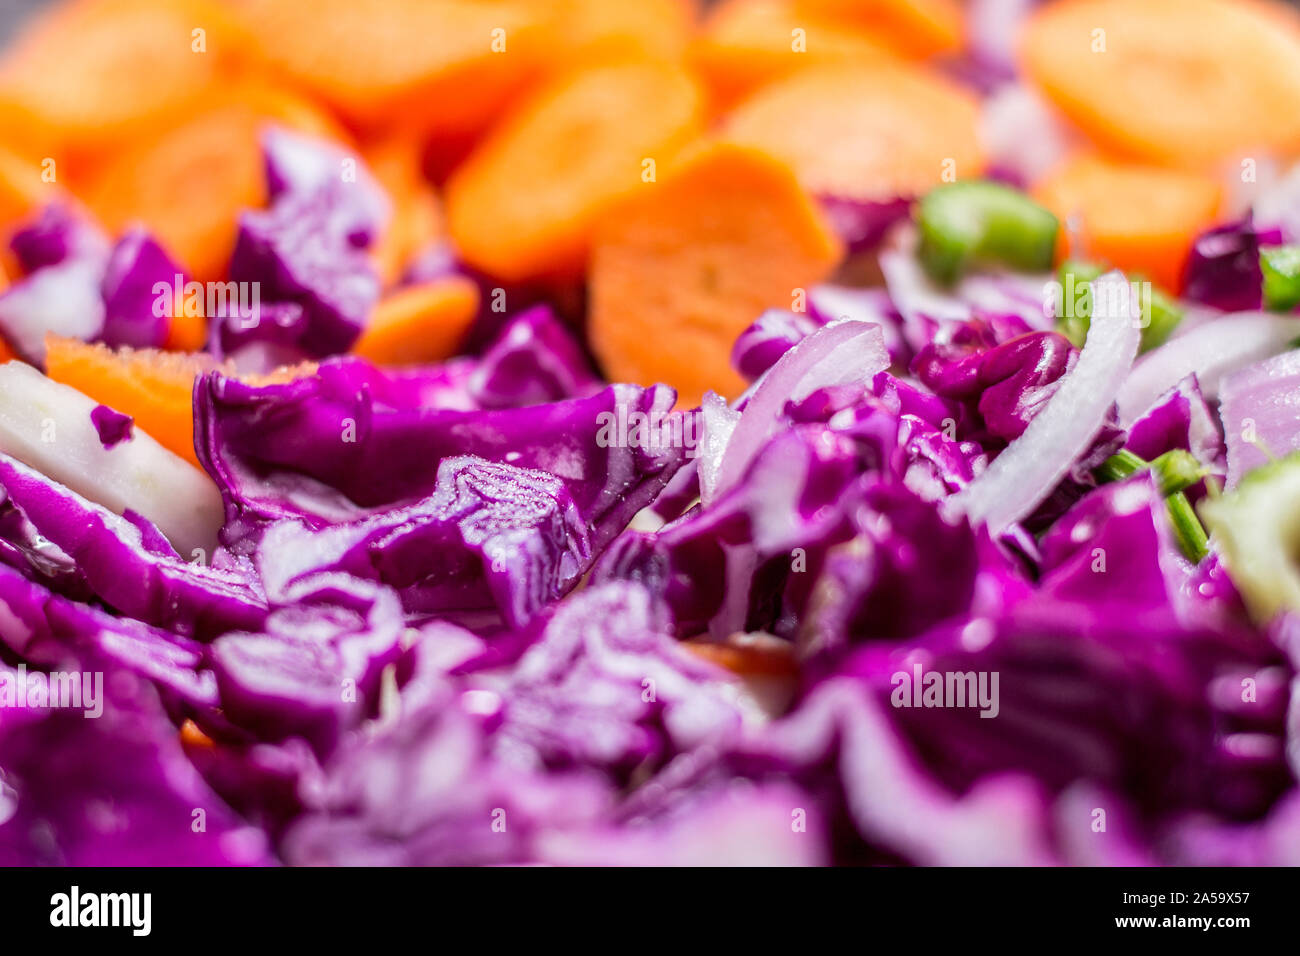 Red cabbage, celery, fennel and carrot salad Stock Photo